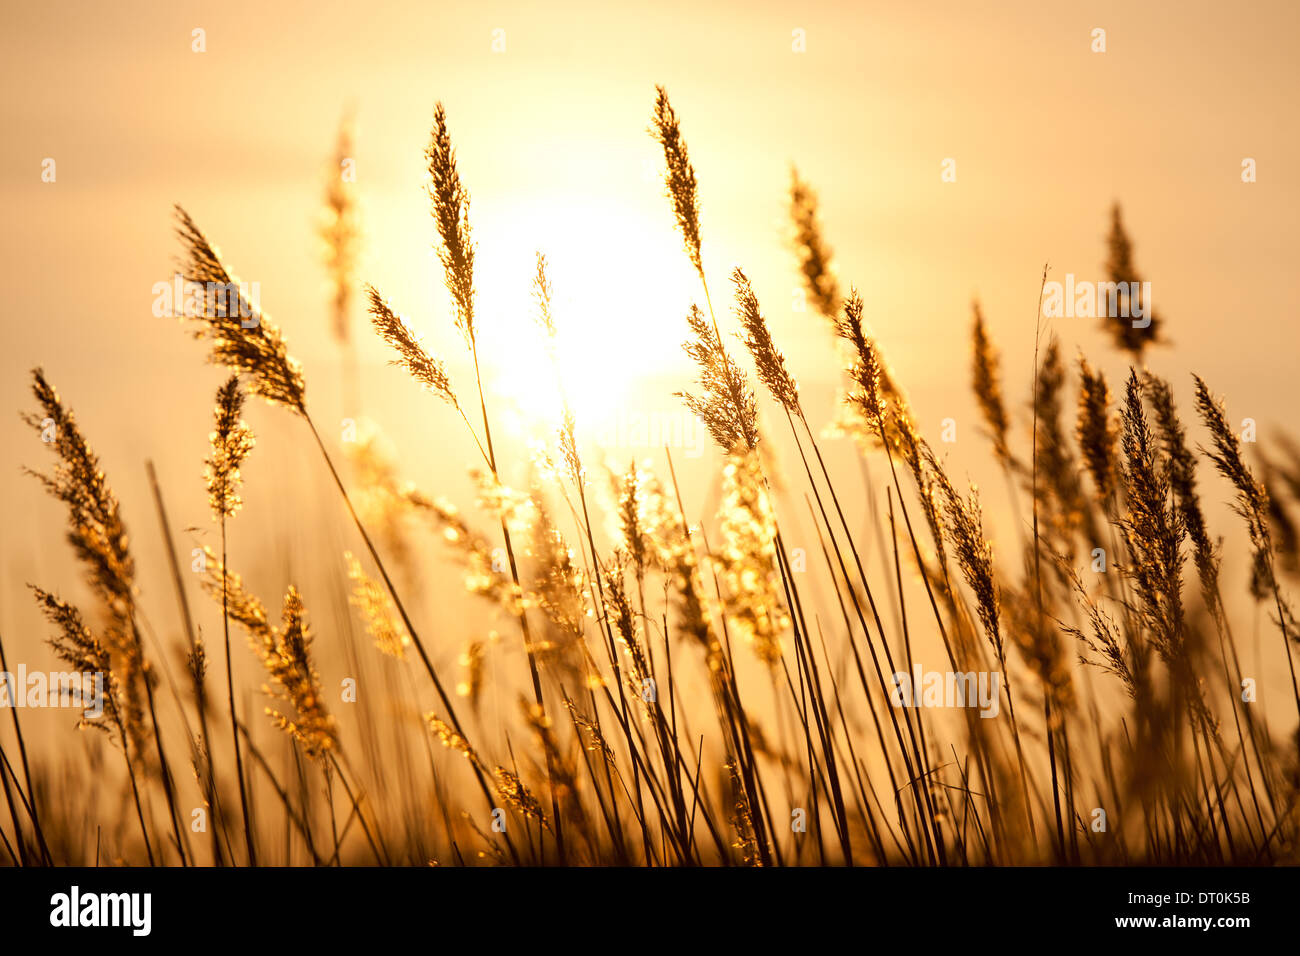 Silhouette of grass against the sun Stock Photo